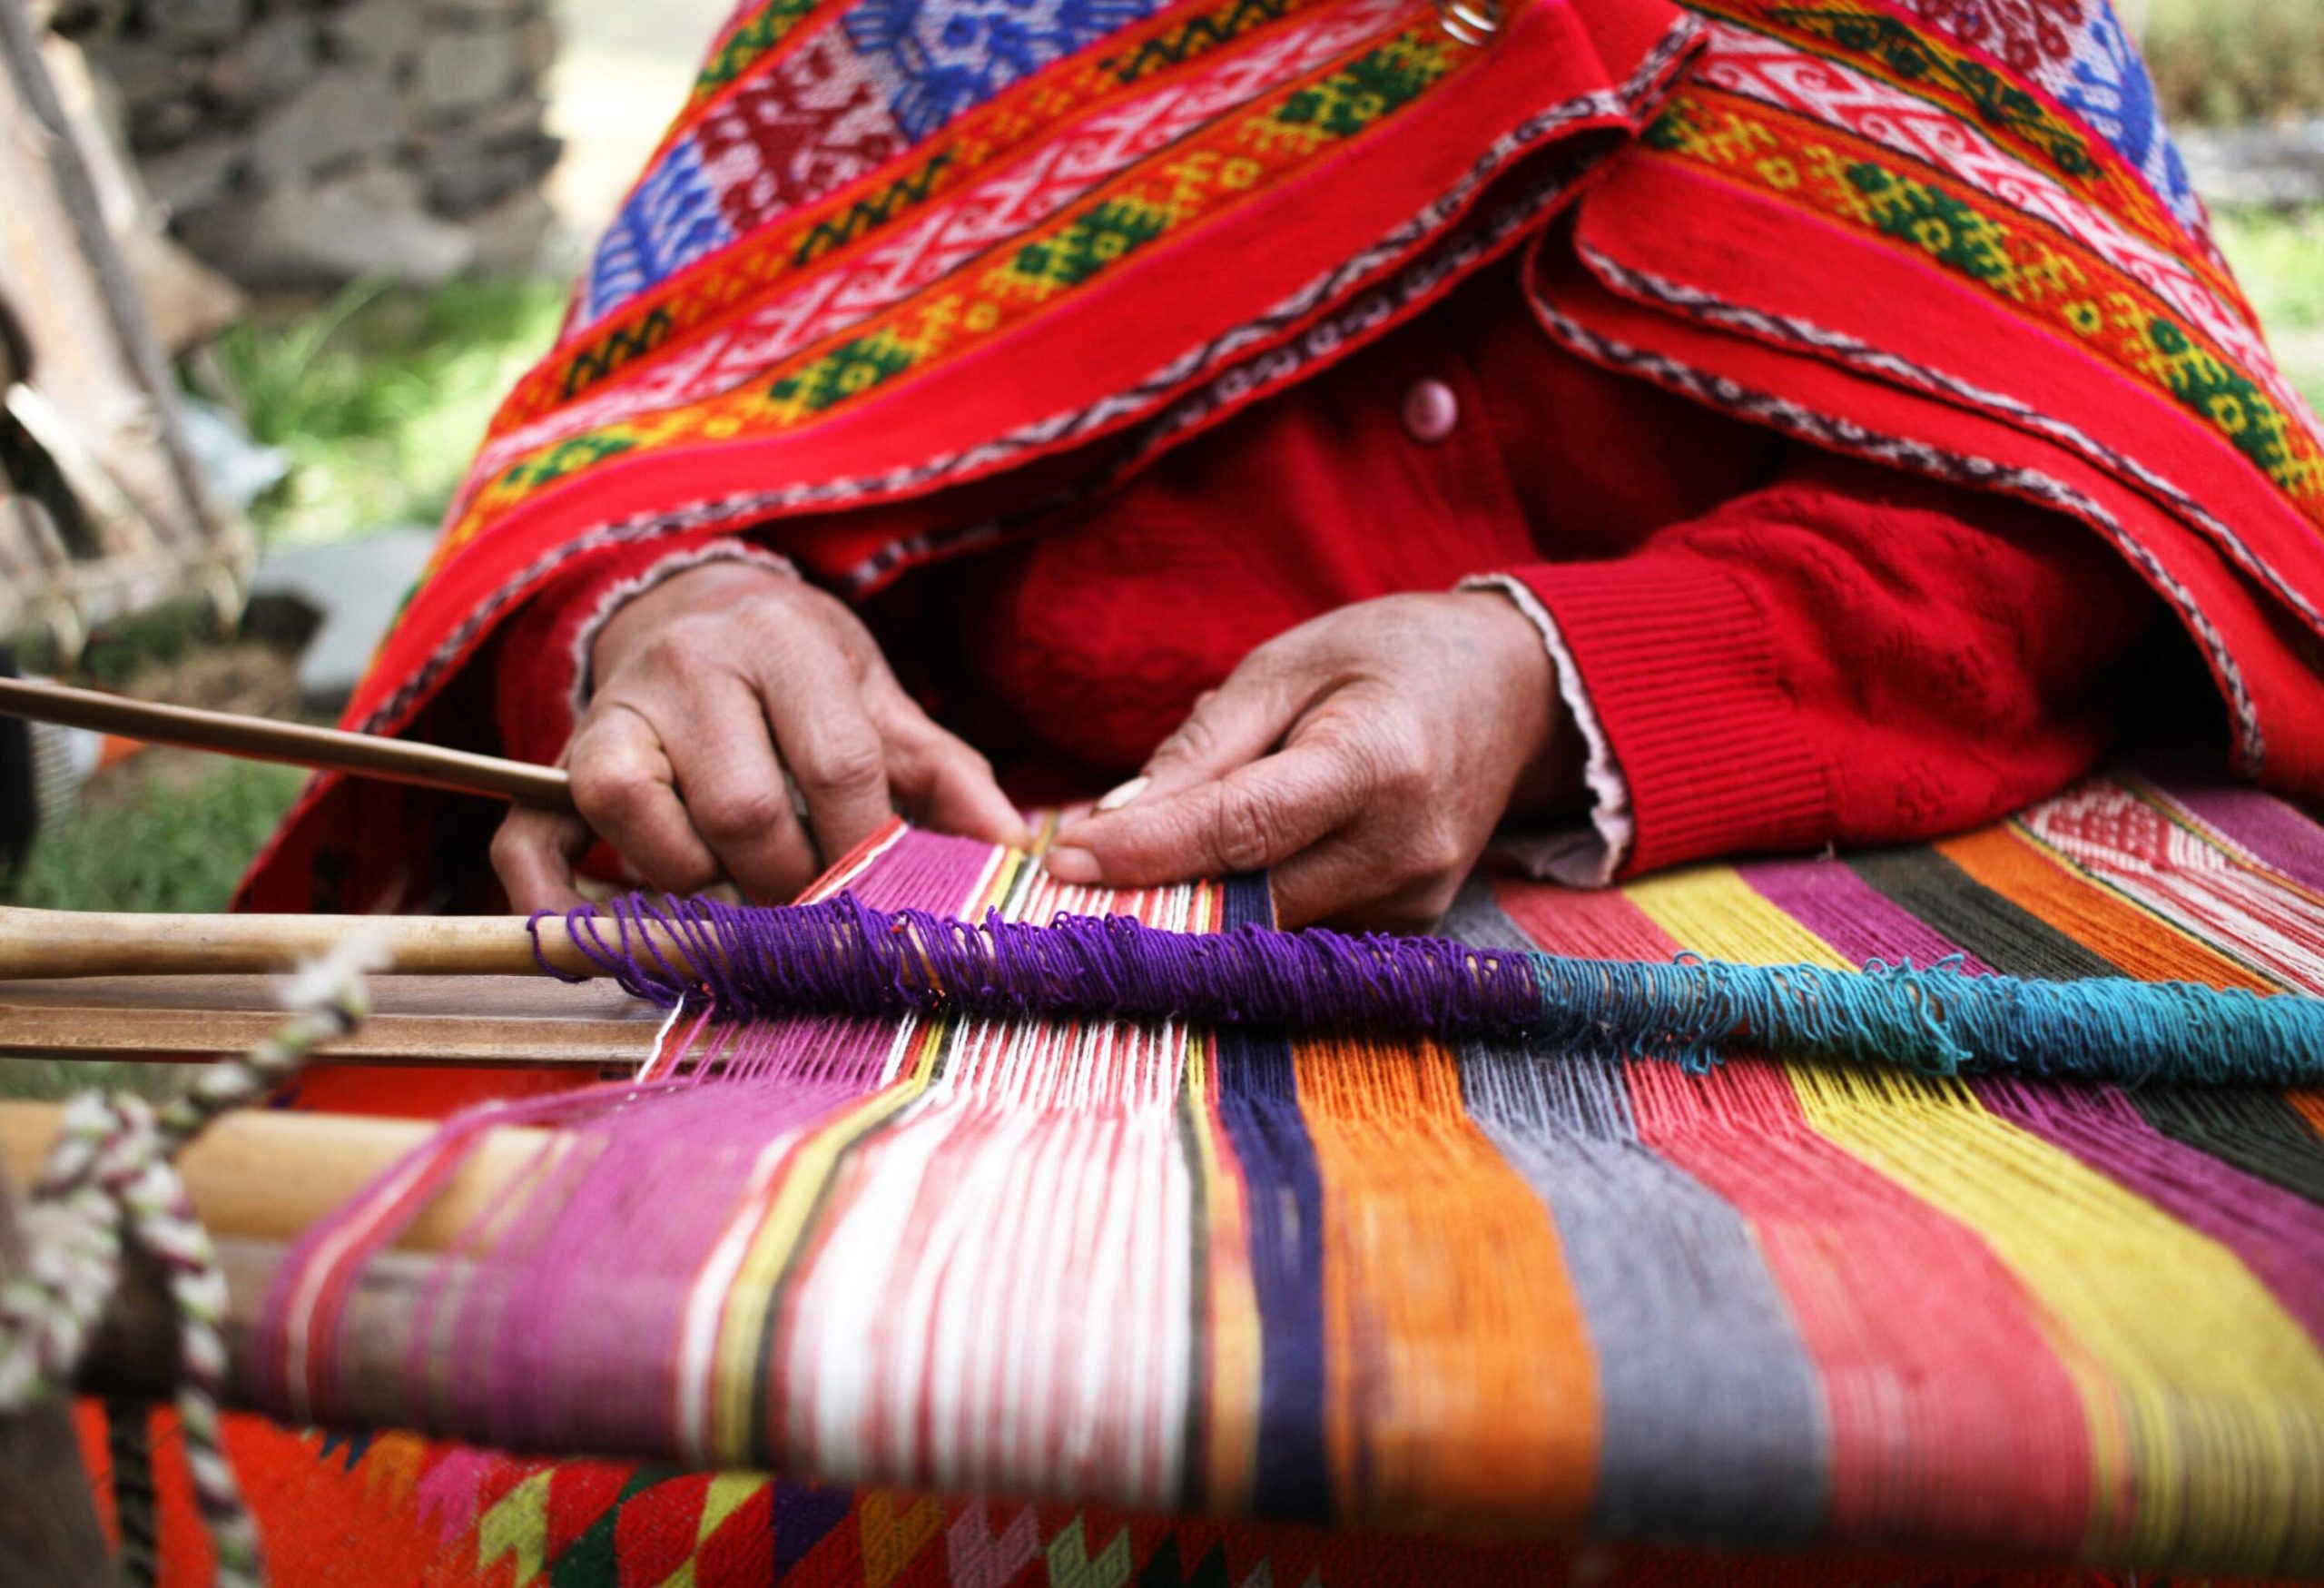 A person wearing a colourful shawl and jacket weaves the fibres of colourful fabrics into a traditional weaving machine.